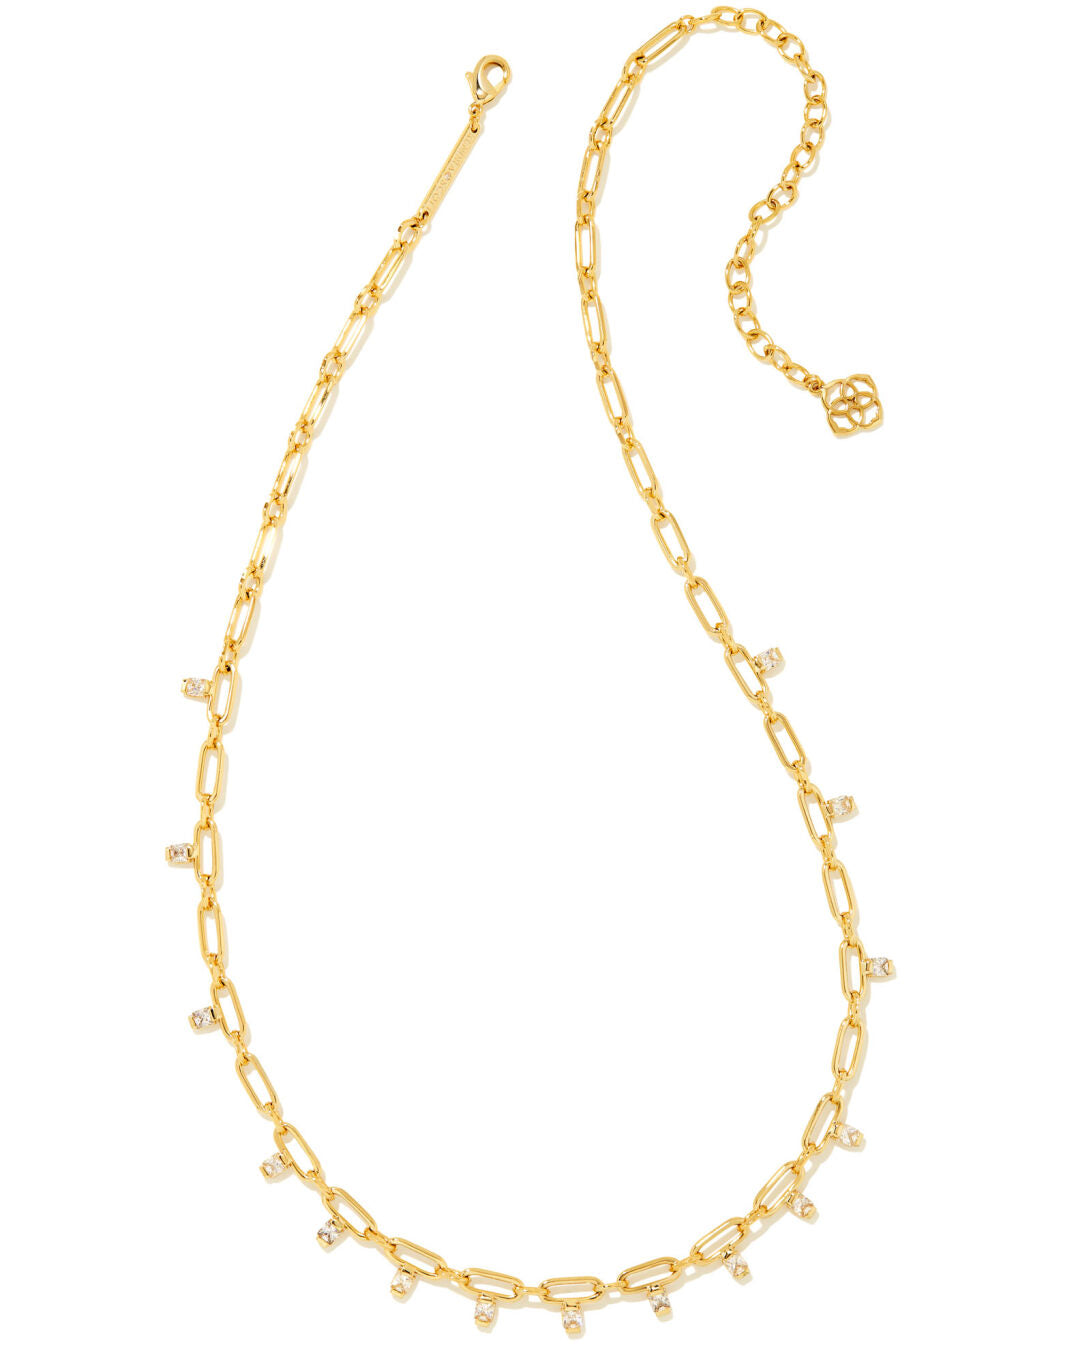 Murphy Crystal Chain Necklace Gold White Cz